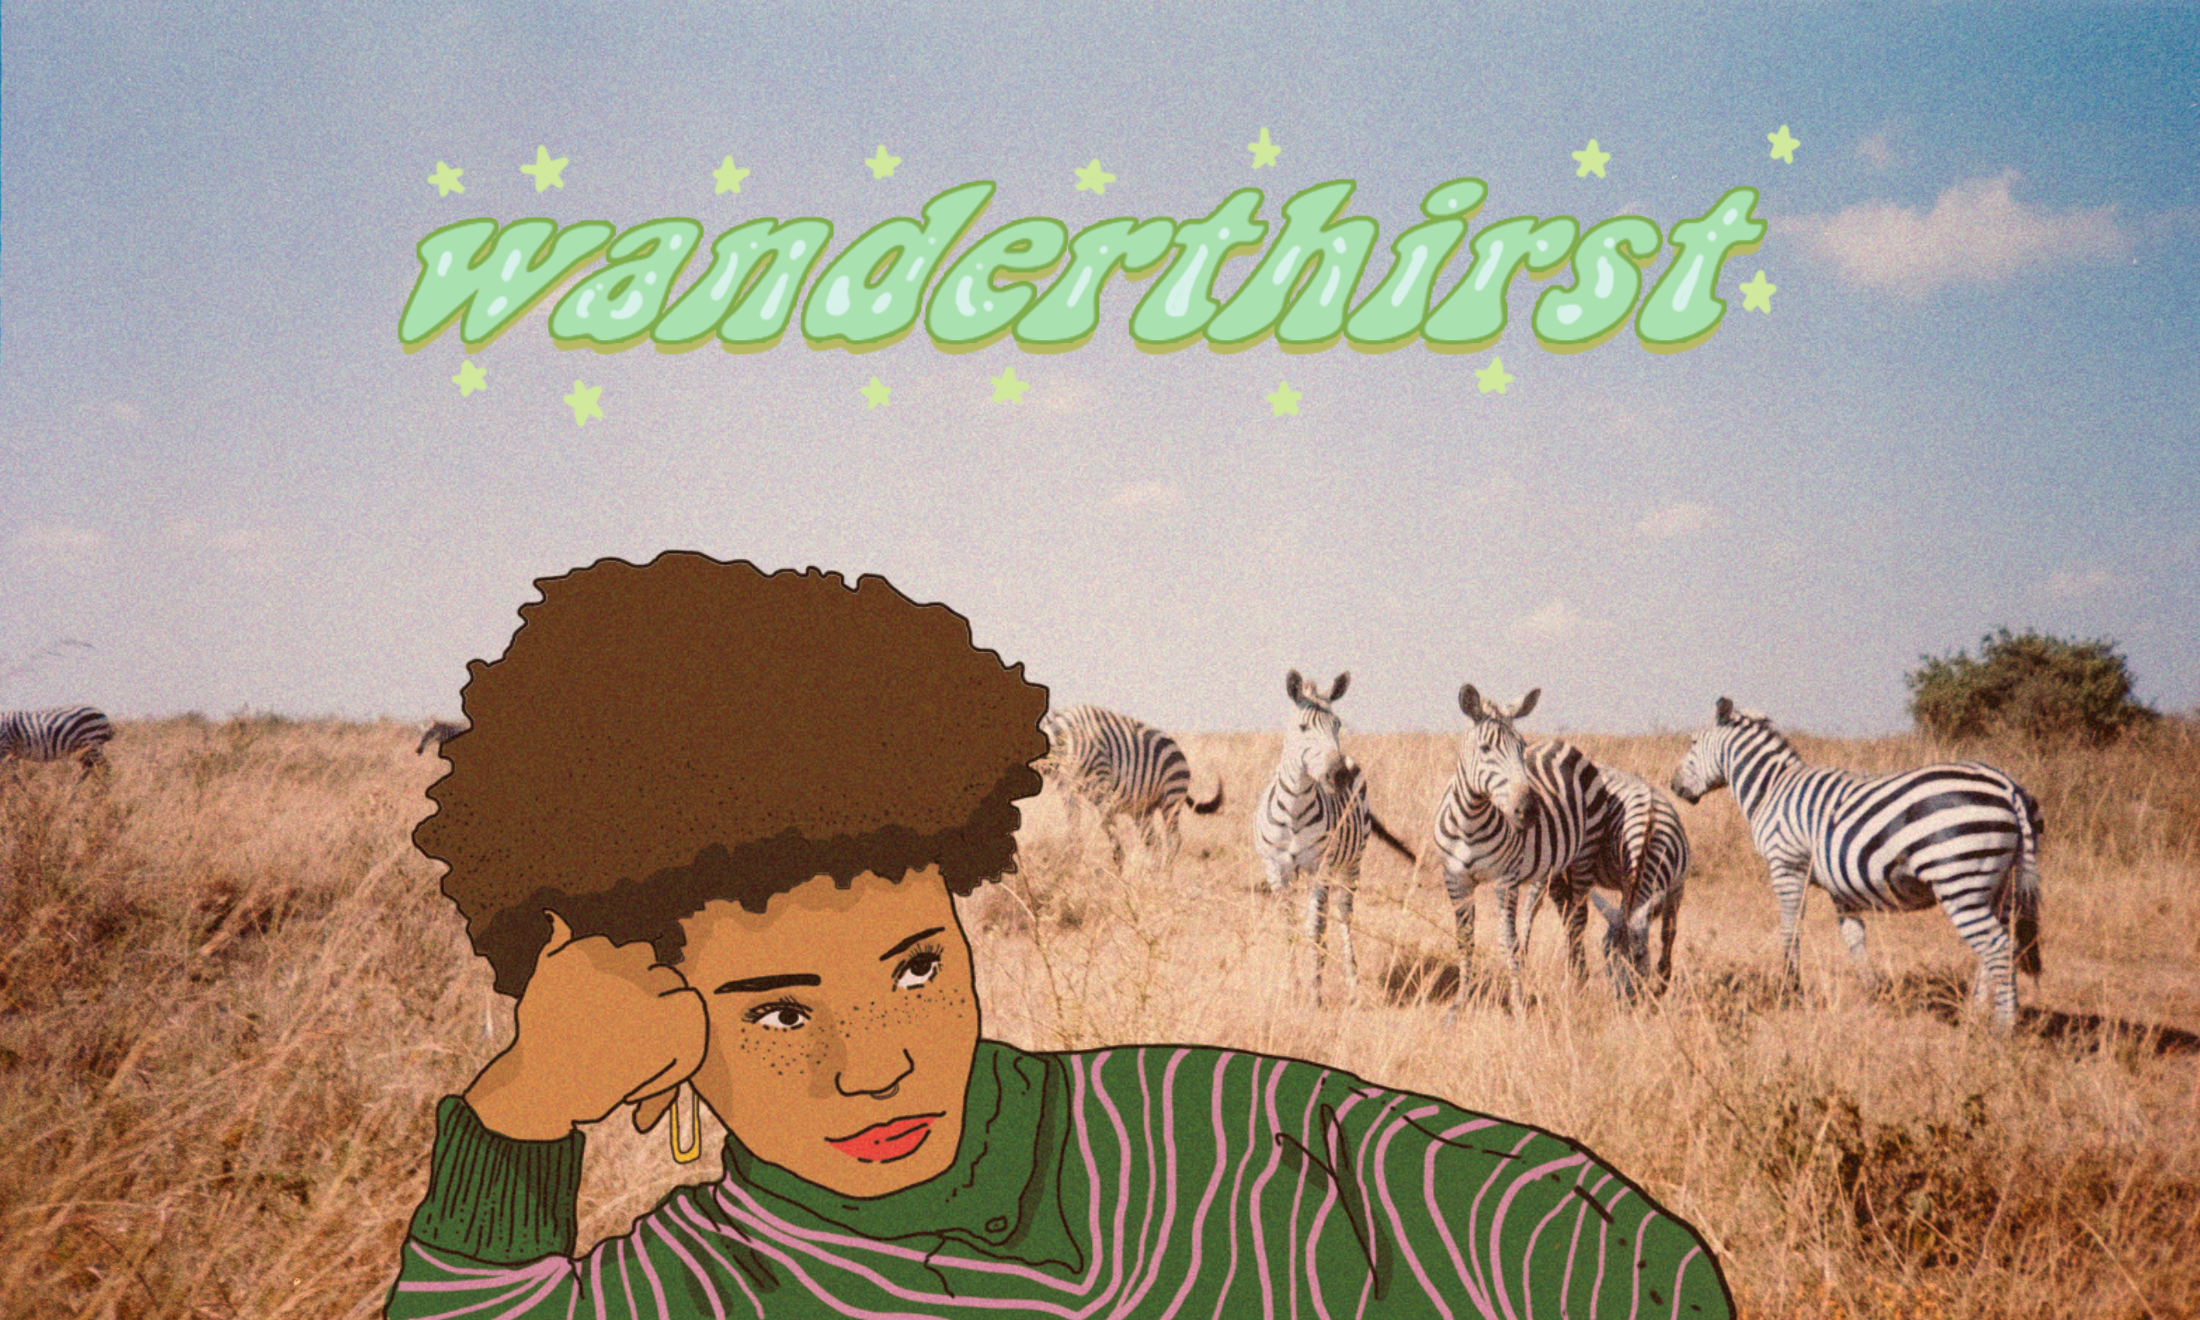 Wanderthirst: my first time in Nairobi felt like stepping through a looking glass